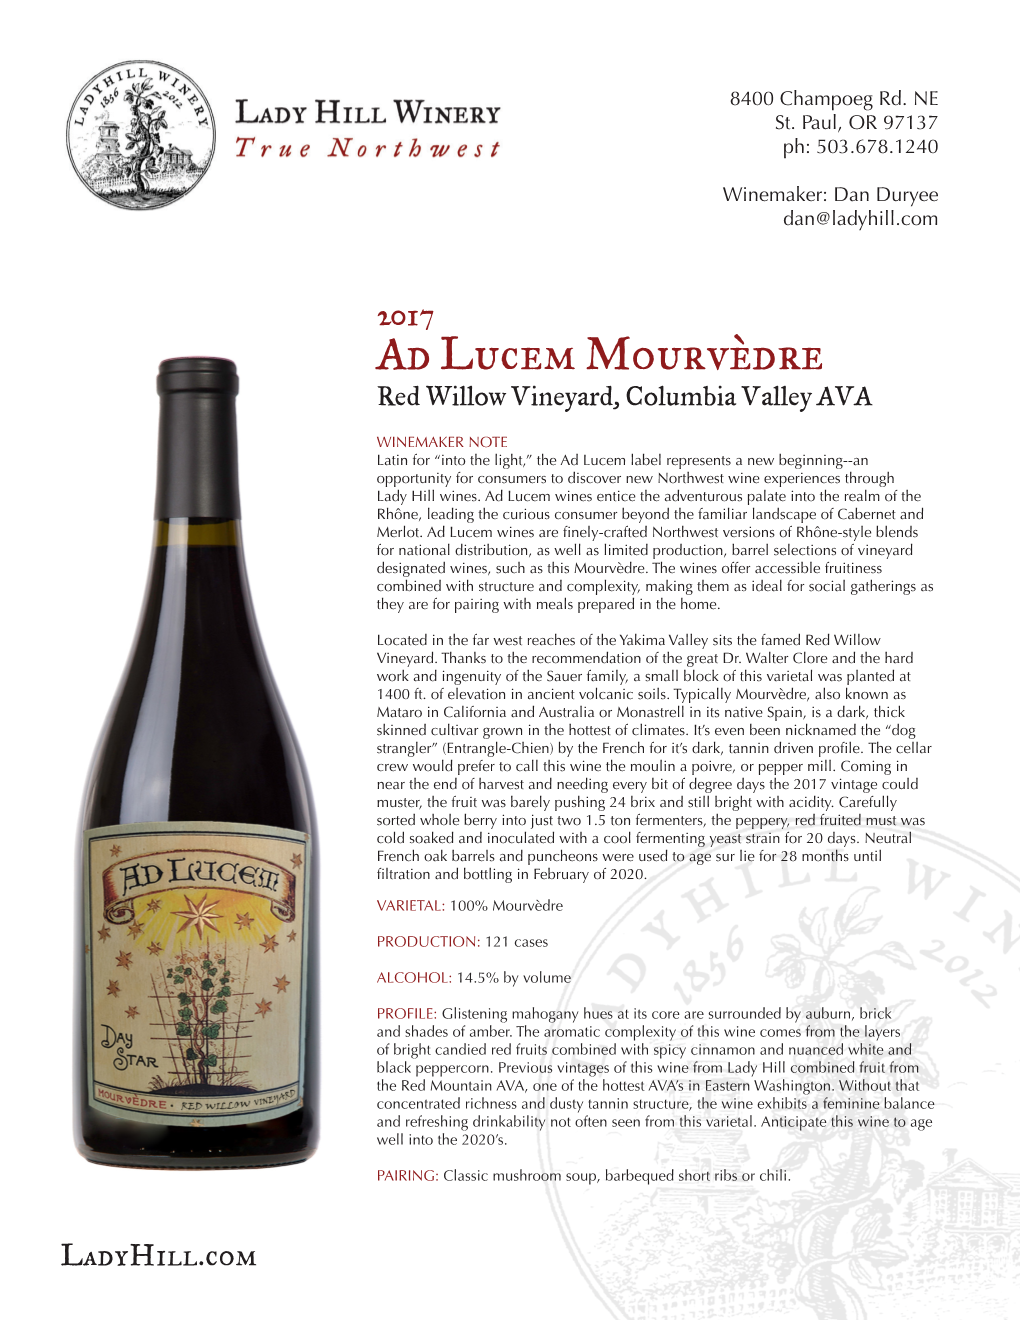 Ad Lucem Mourvèdre Red Willow Vineyard, Columbia Valley AVA